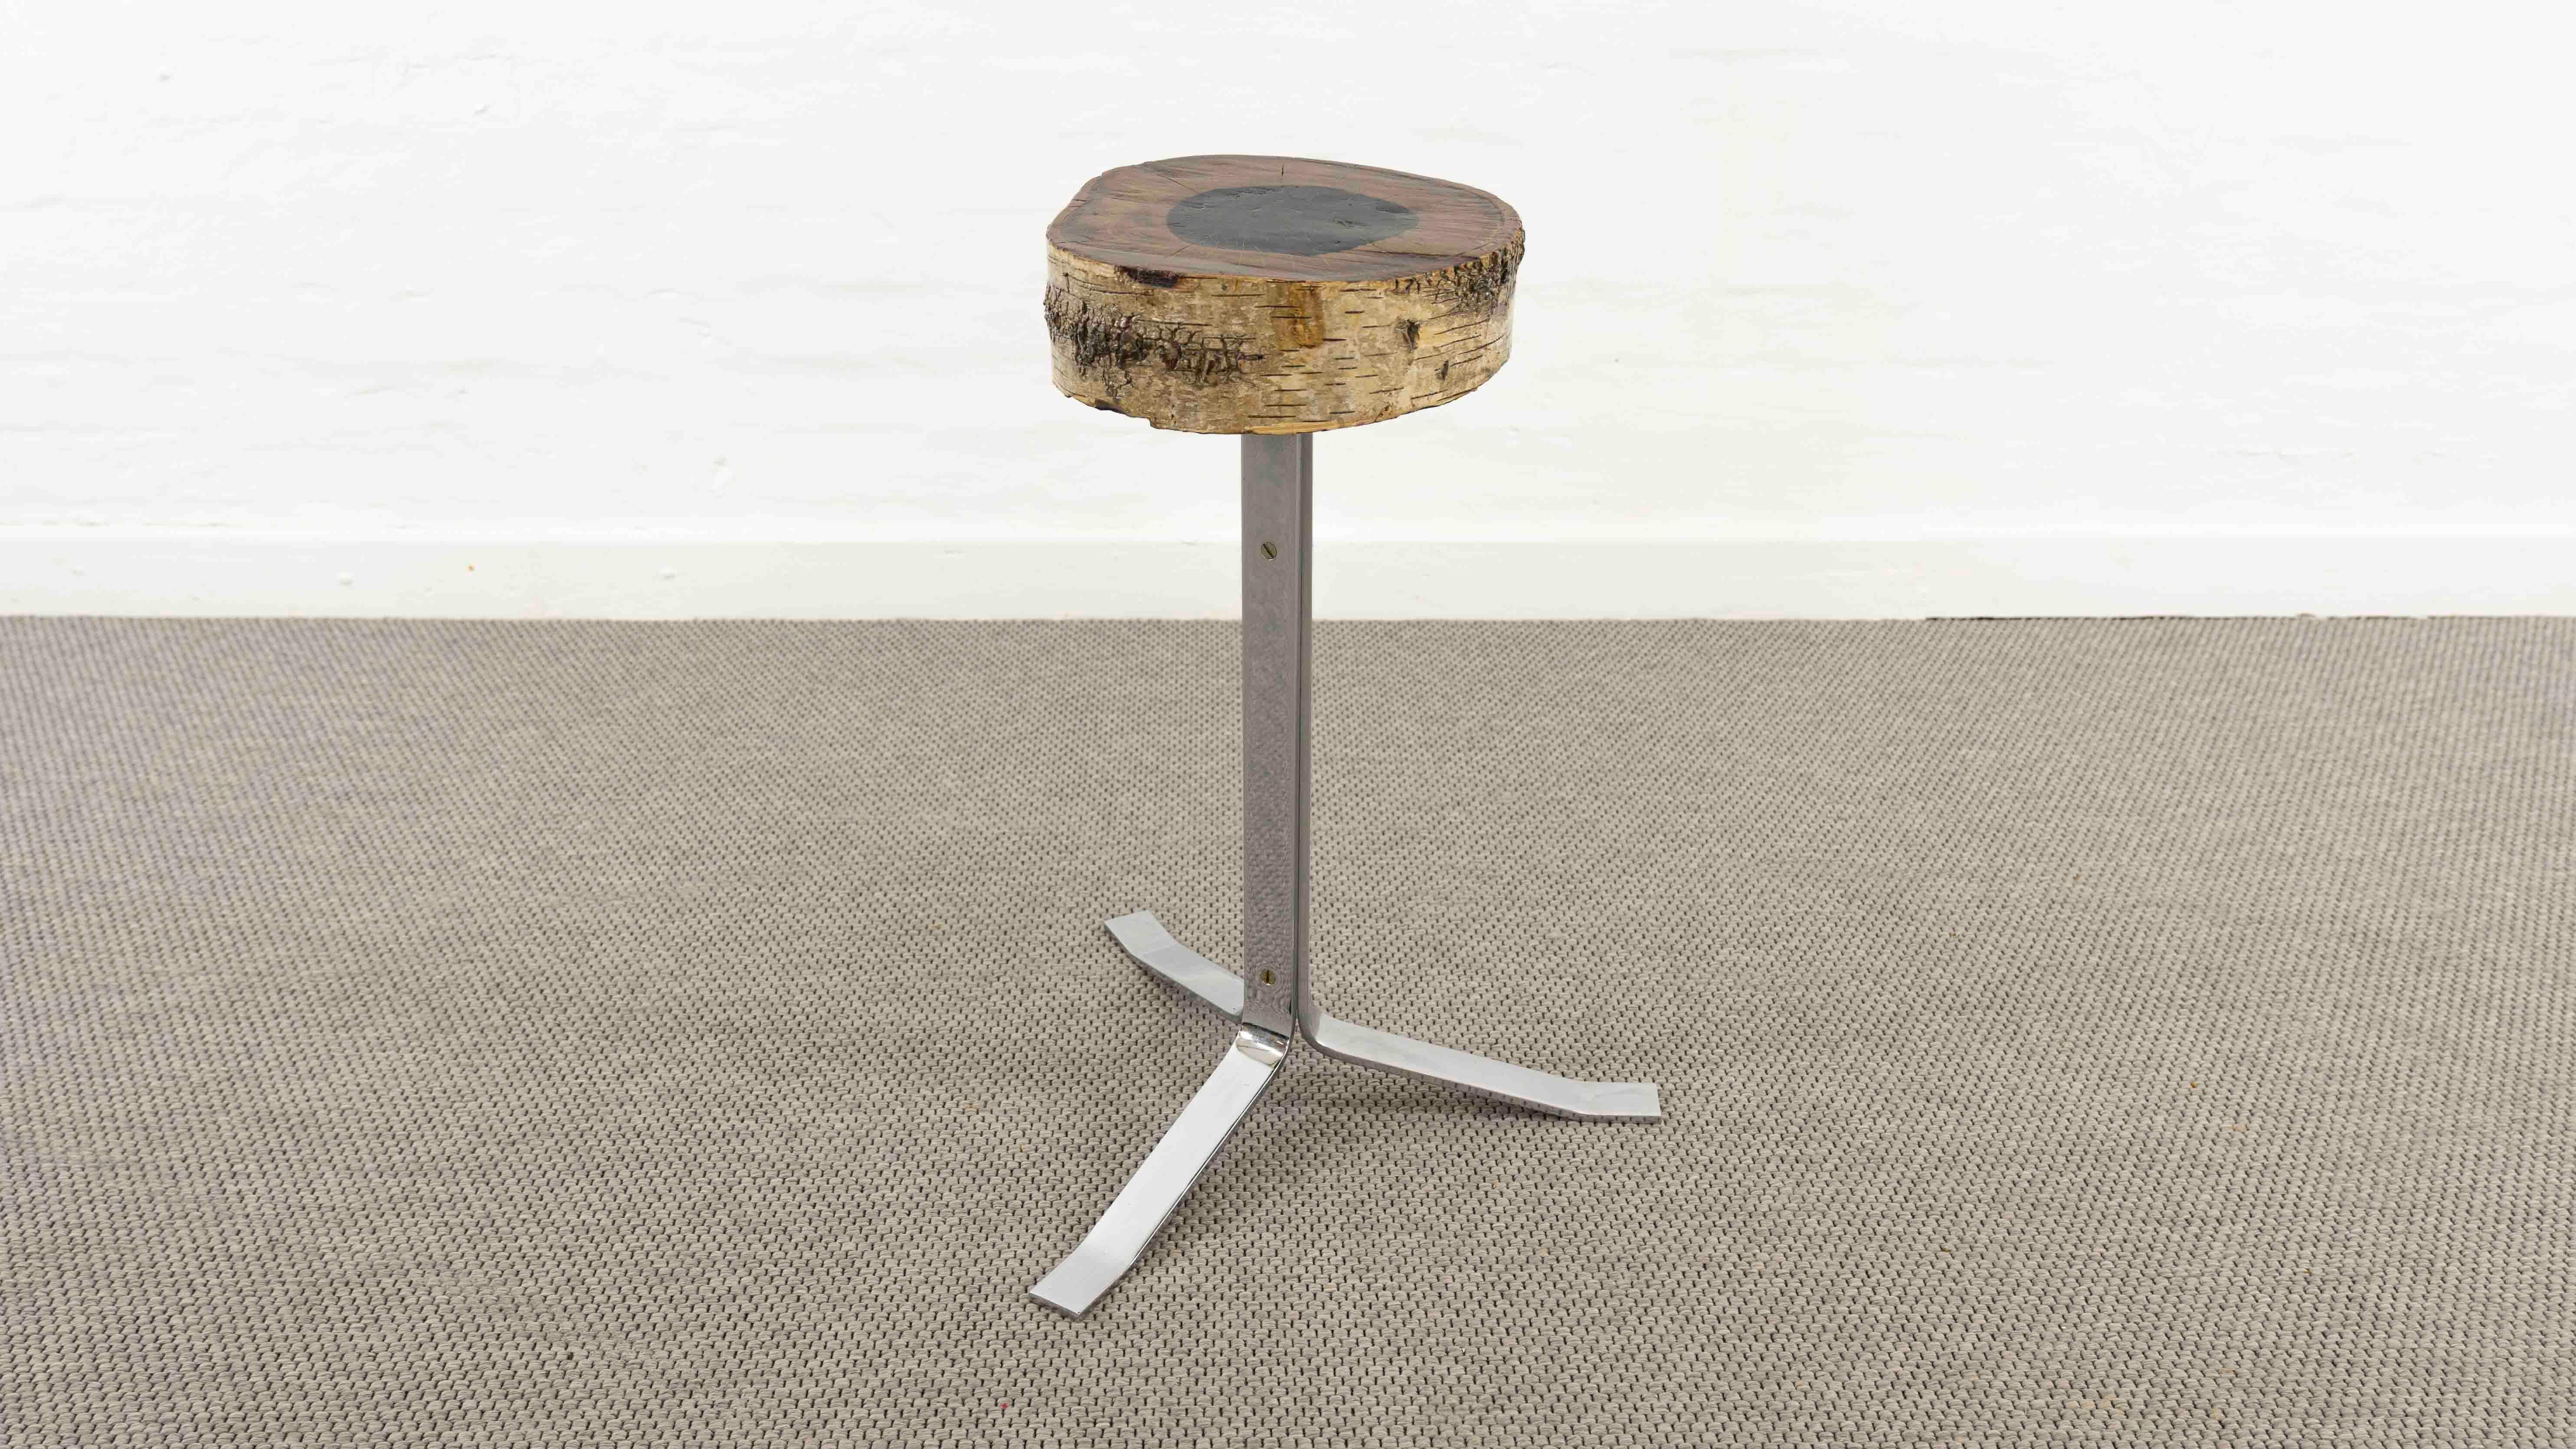 Vintage Stool or Sidetable. Made from solid Birch and chromed massive steel for the base in teh 70s. Designer and Manufacturer unknown. 
Measures: Height, 65cm, Diameter of the Birch: ca. 28cm. Diameter of the base: ca. 50cm.